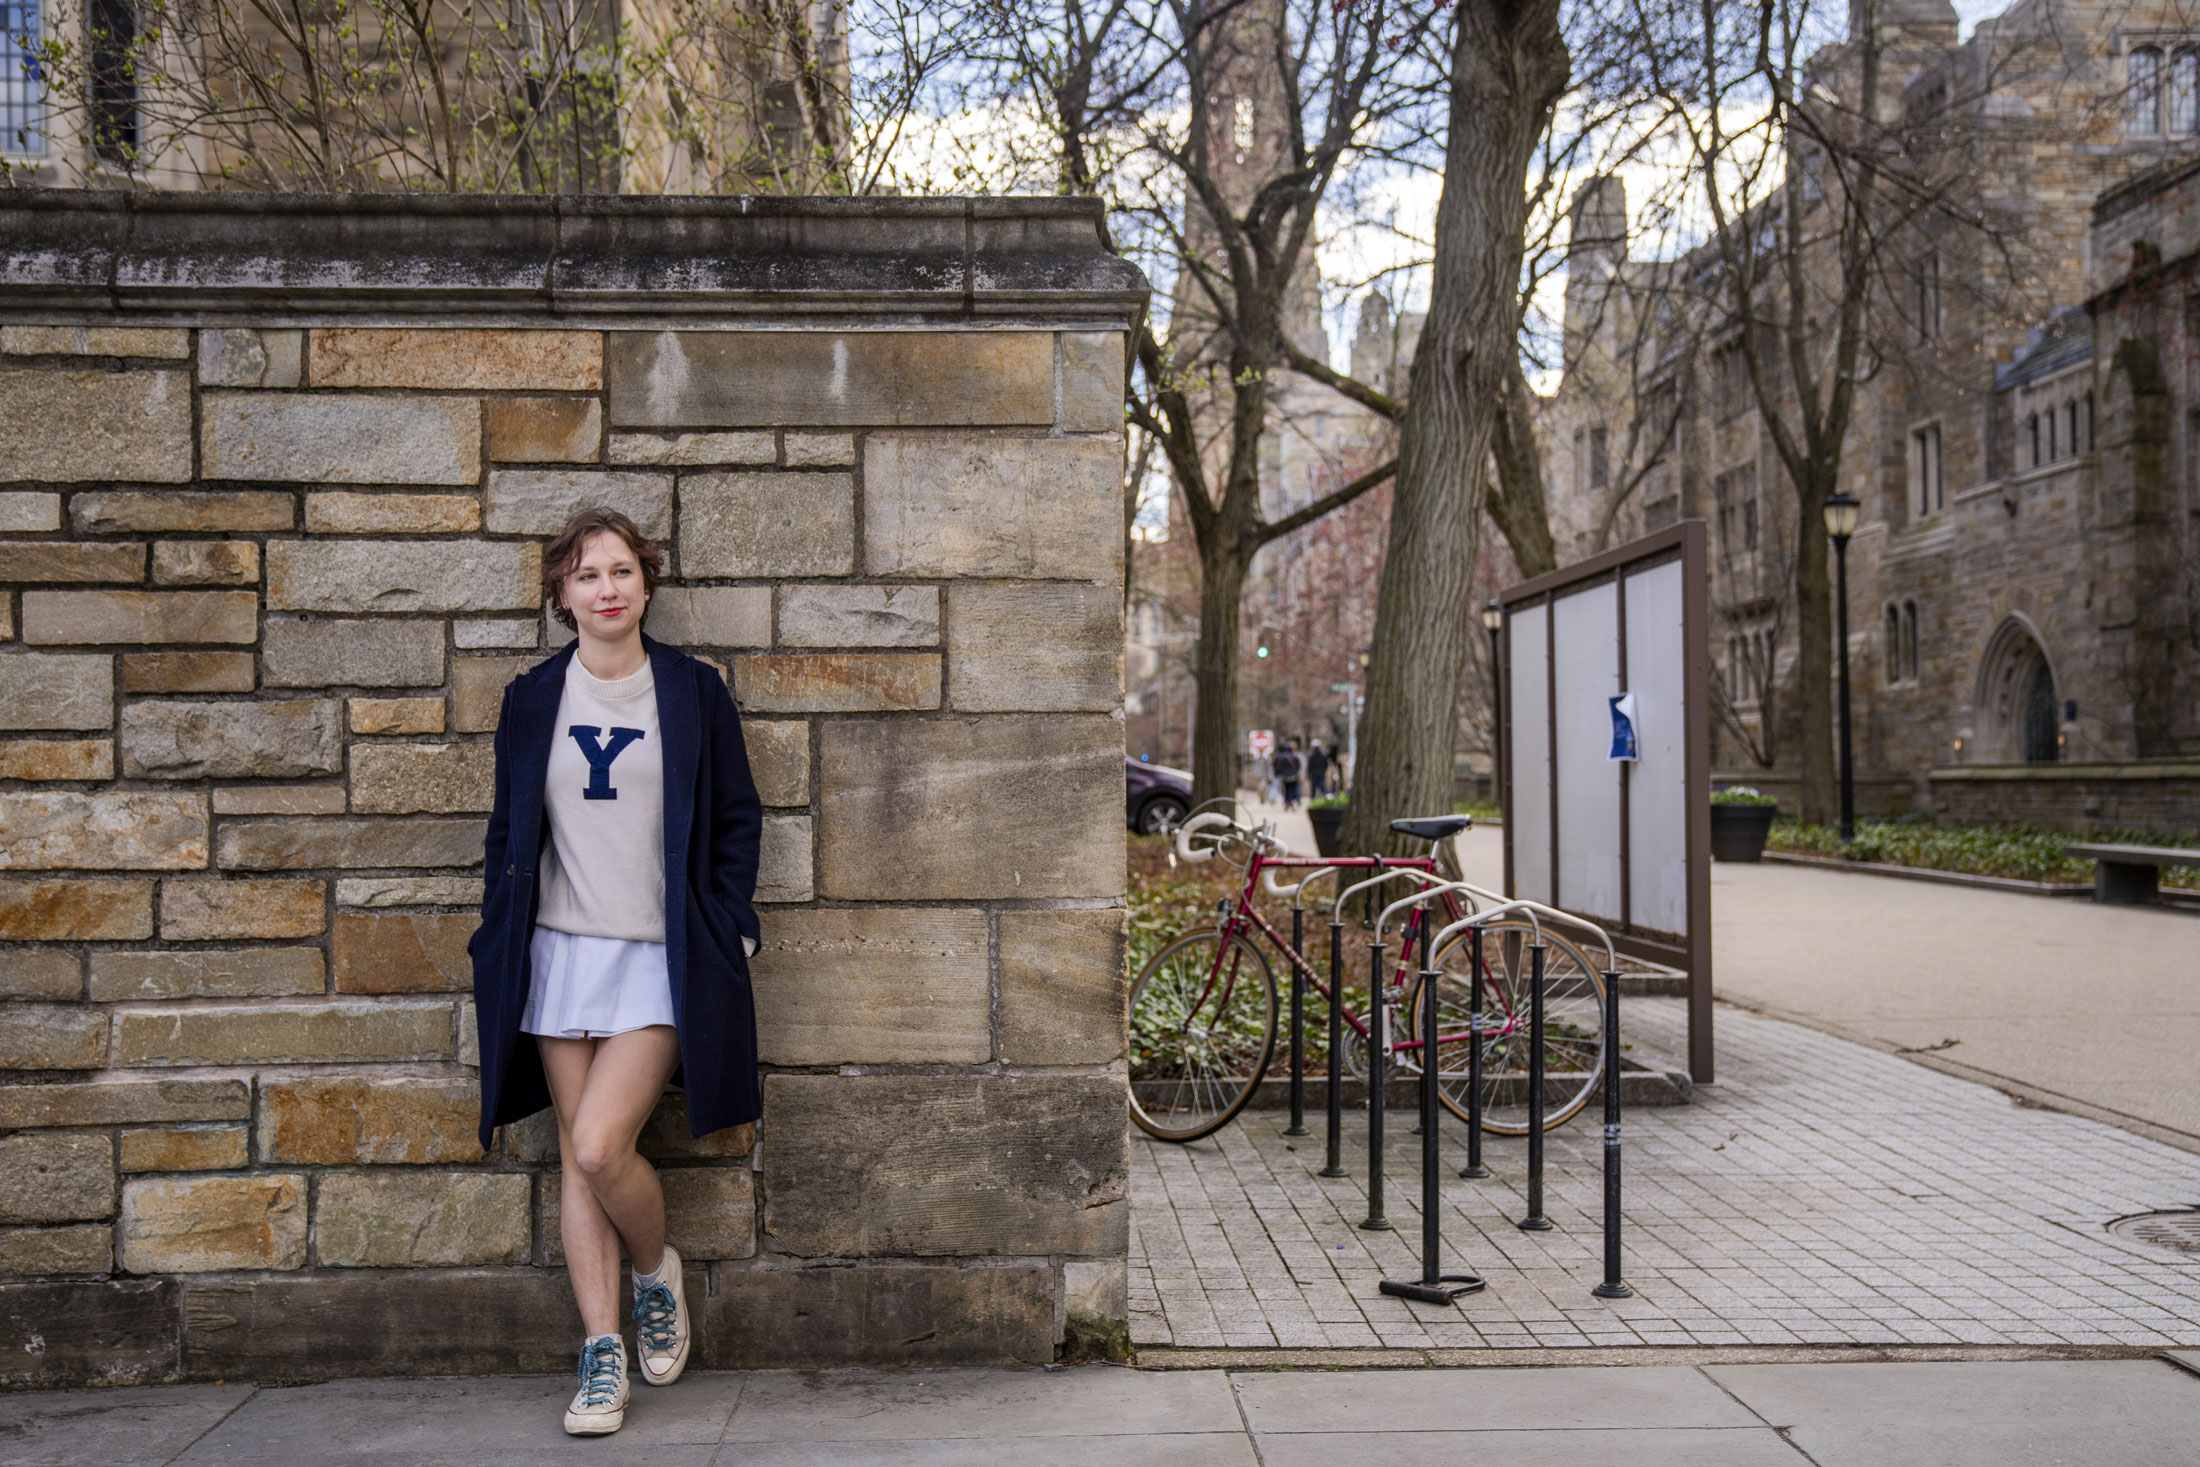 A portrait of a young woman wearing a long cardigan and shirt with a Yale Y logo, leaning against a wall